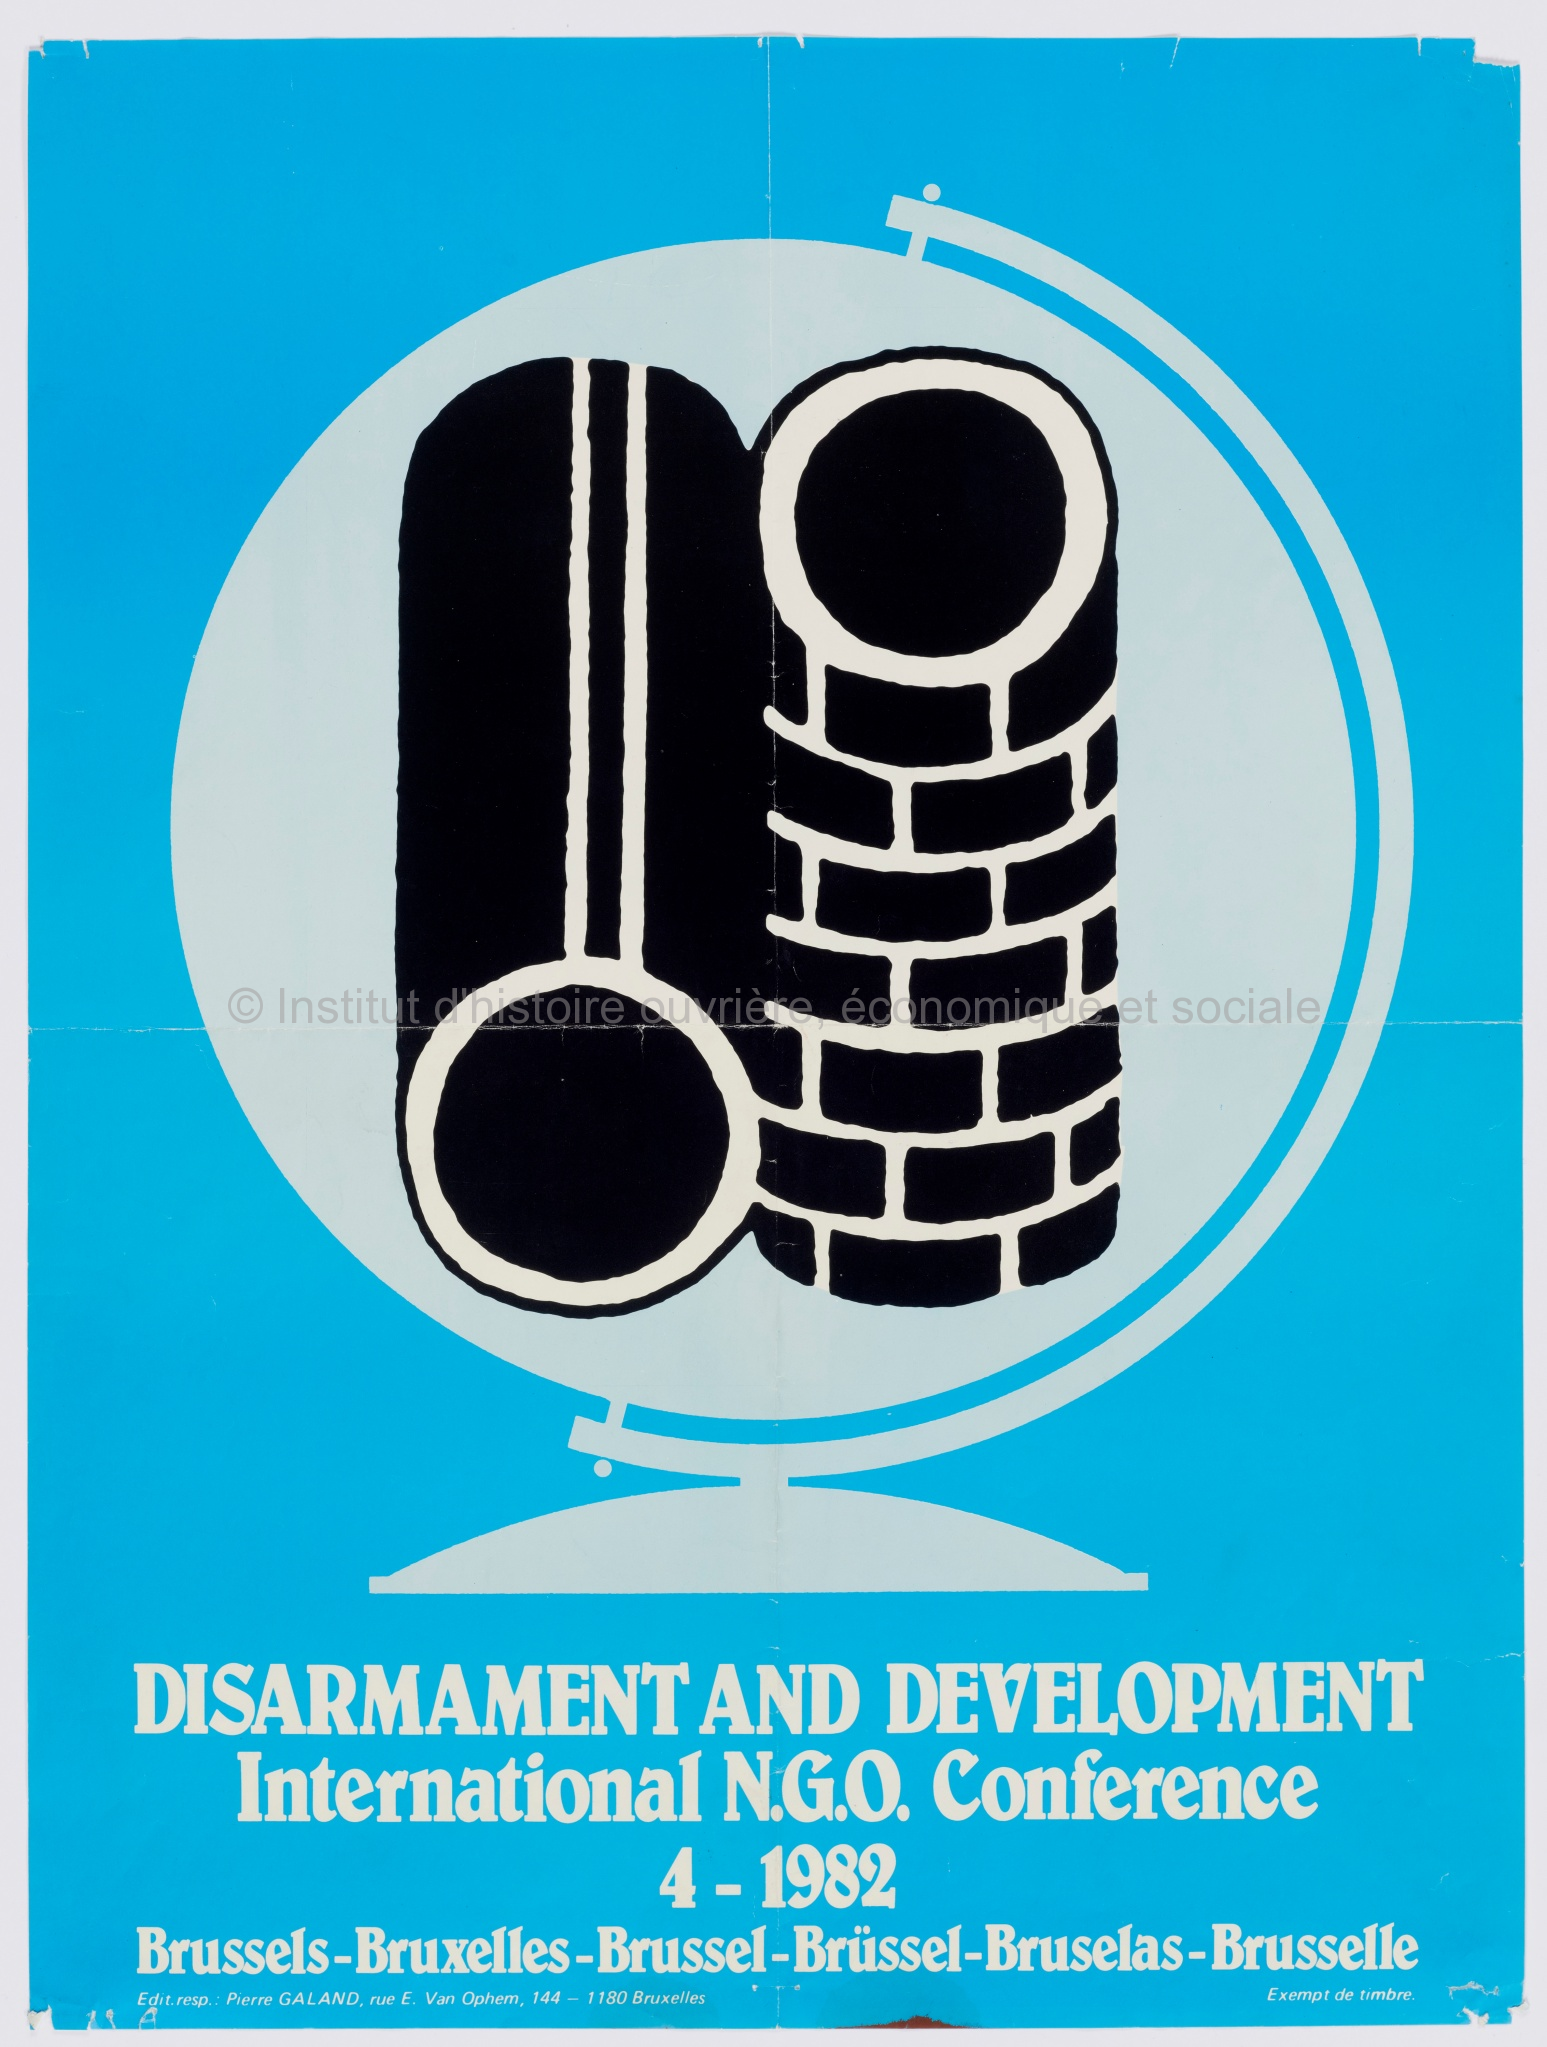 Disarmament and development : International NGO conference, 4-1982, Bruxelles